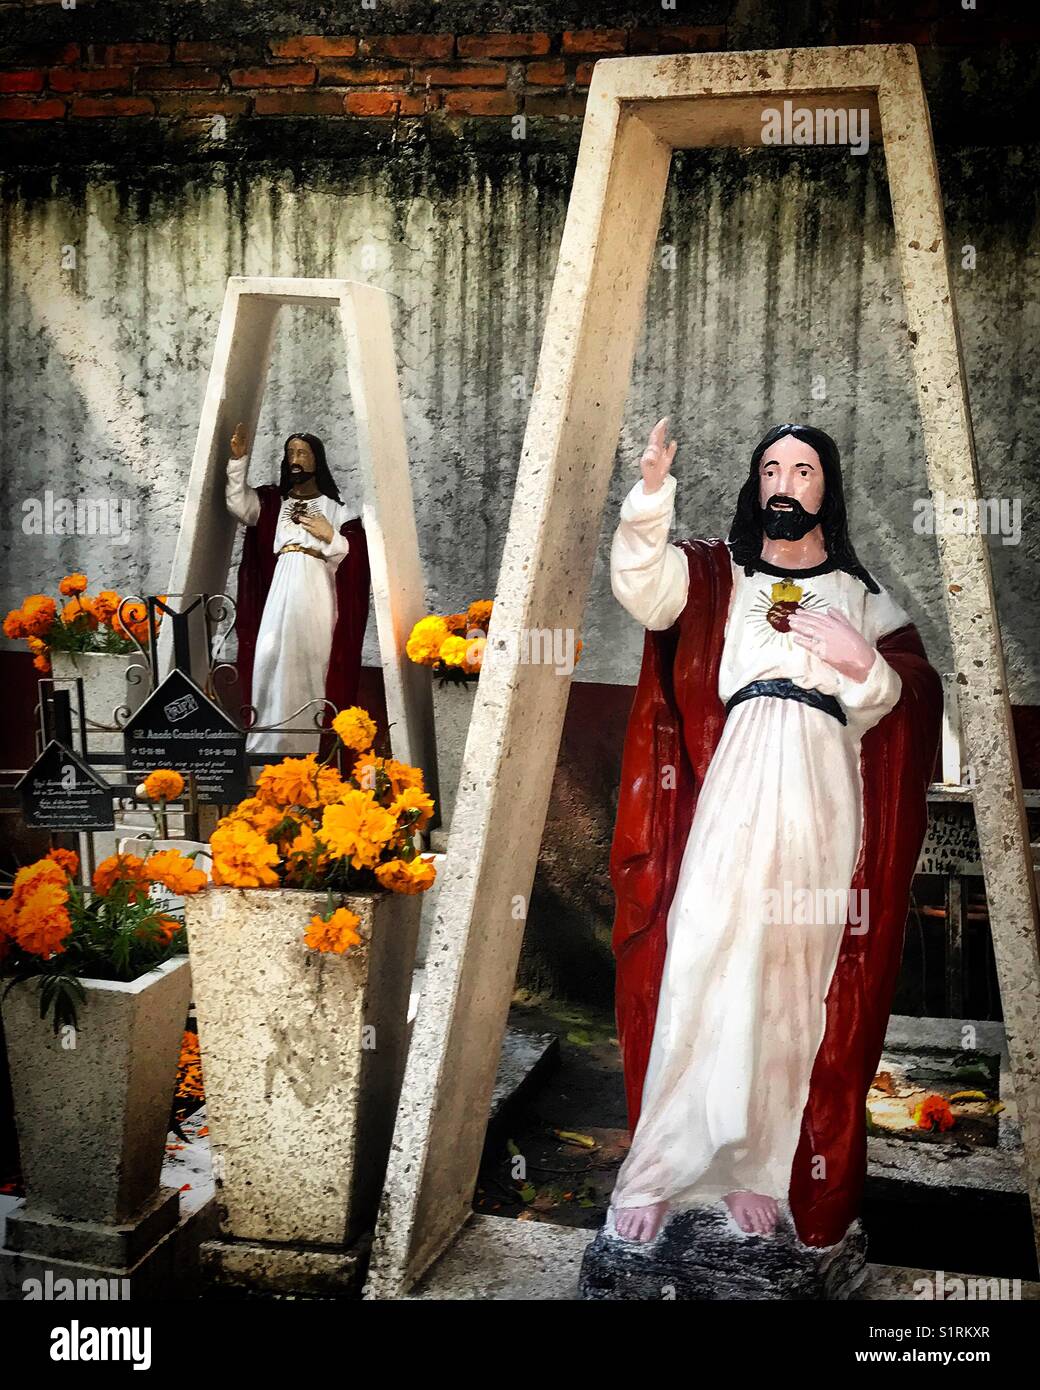 Marigold flowers and images of the Sacred Heart of Jesus decorate  tombs during Day of the Dead in Mexico City, Mexico. Stock Photo